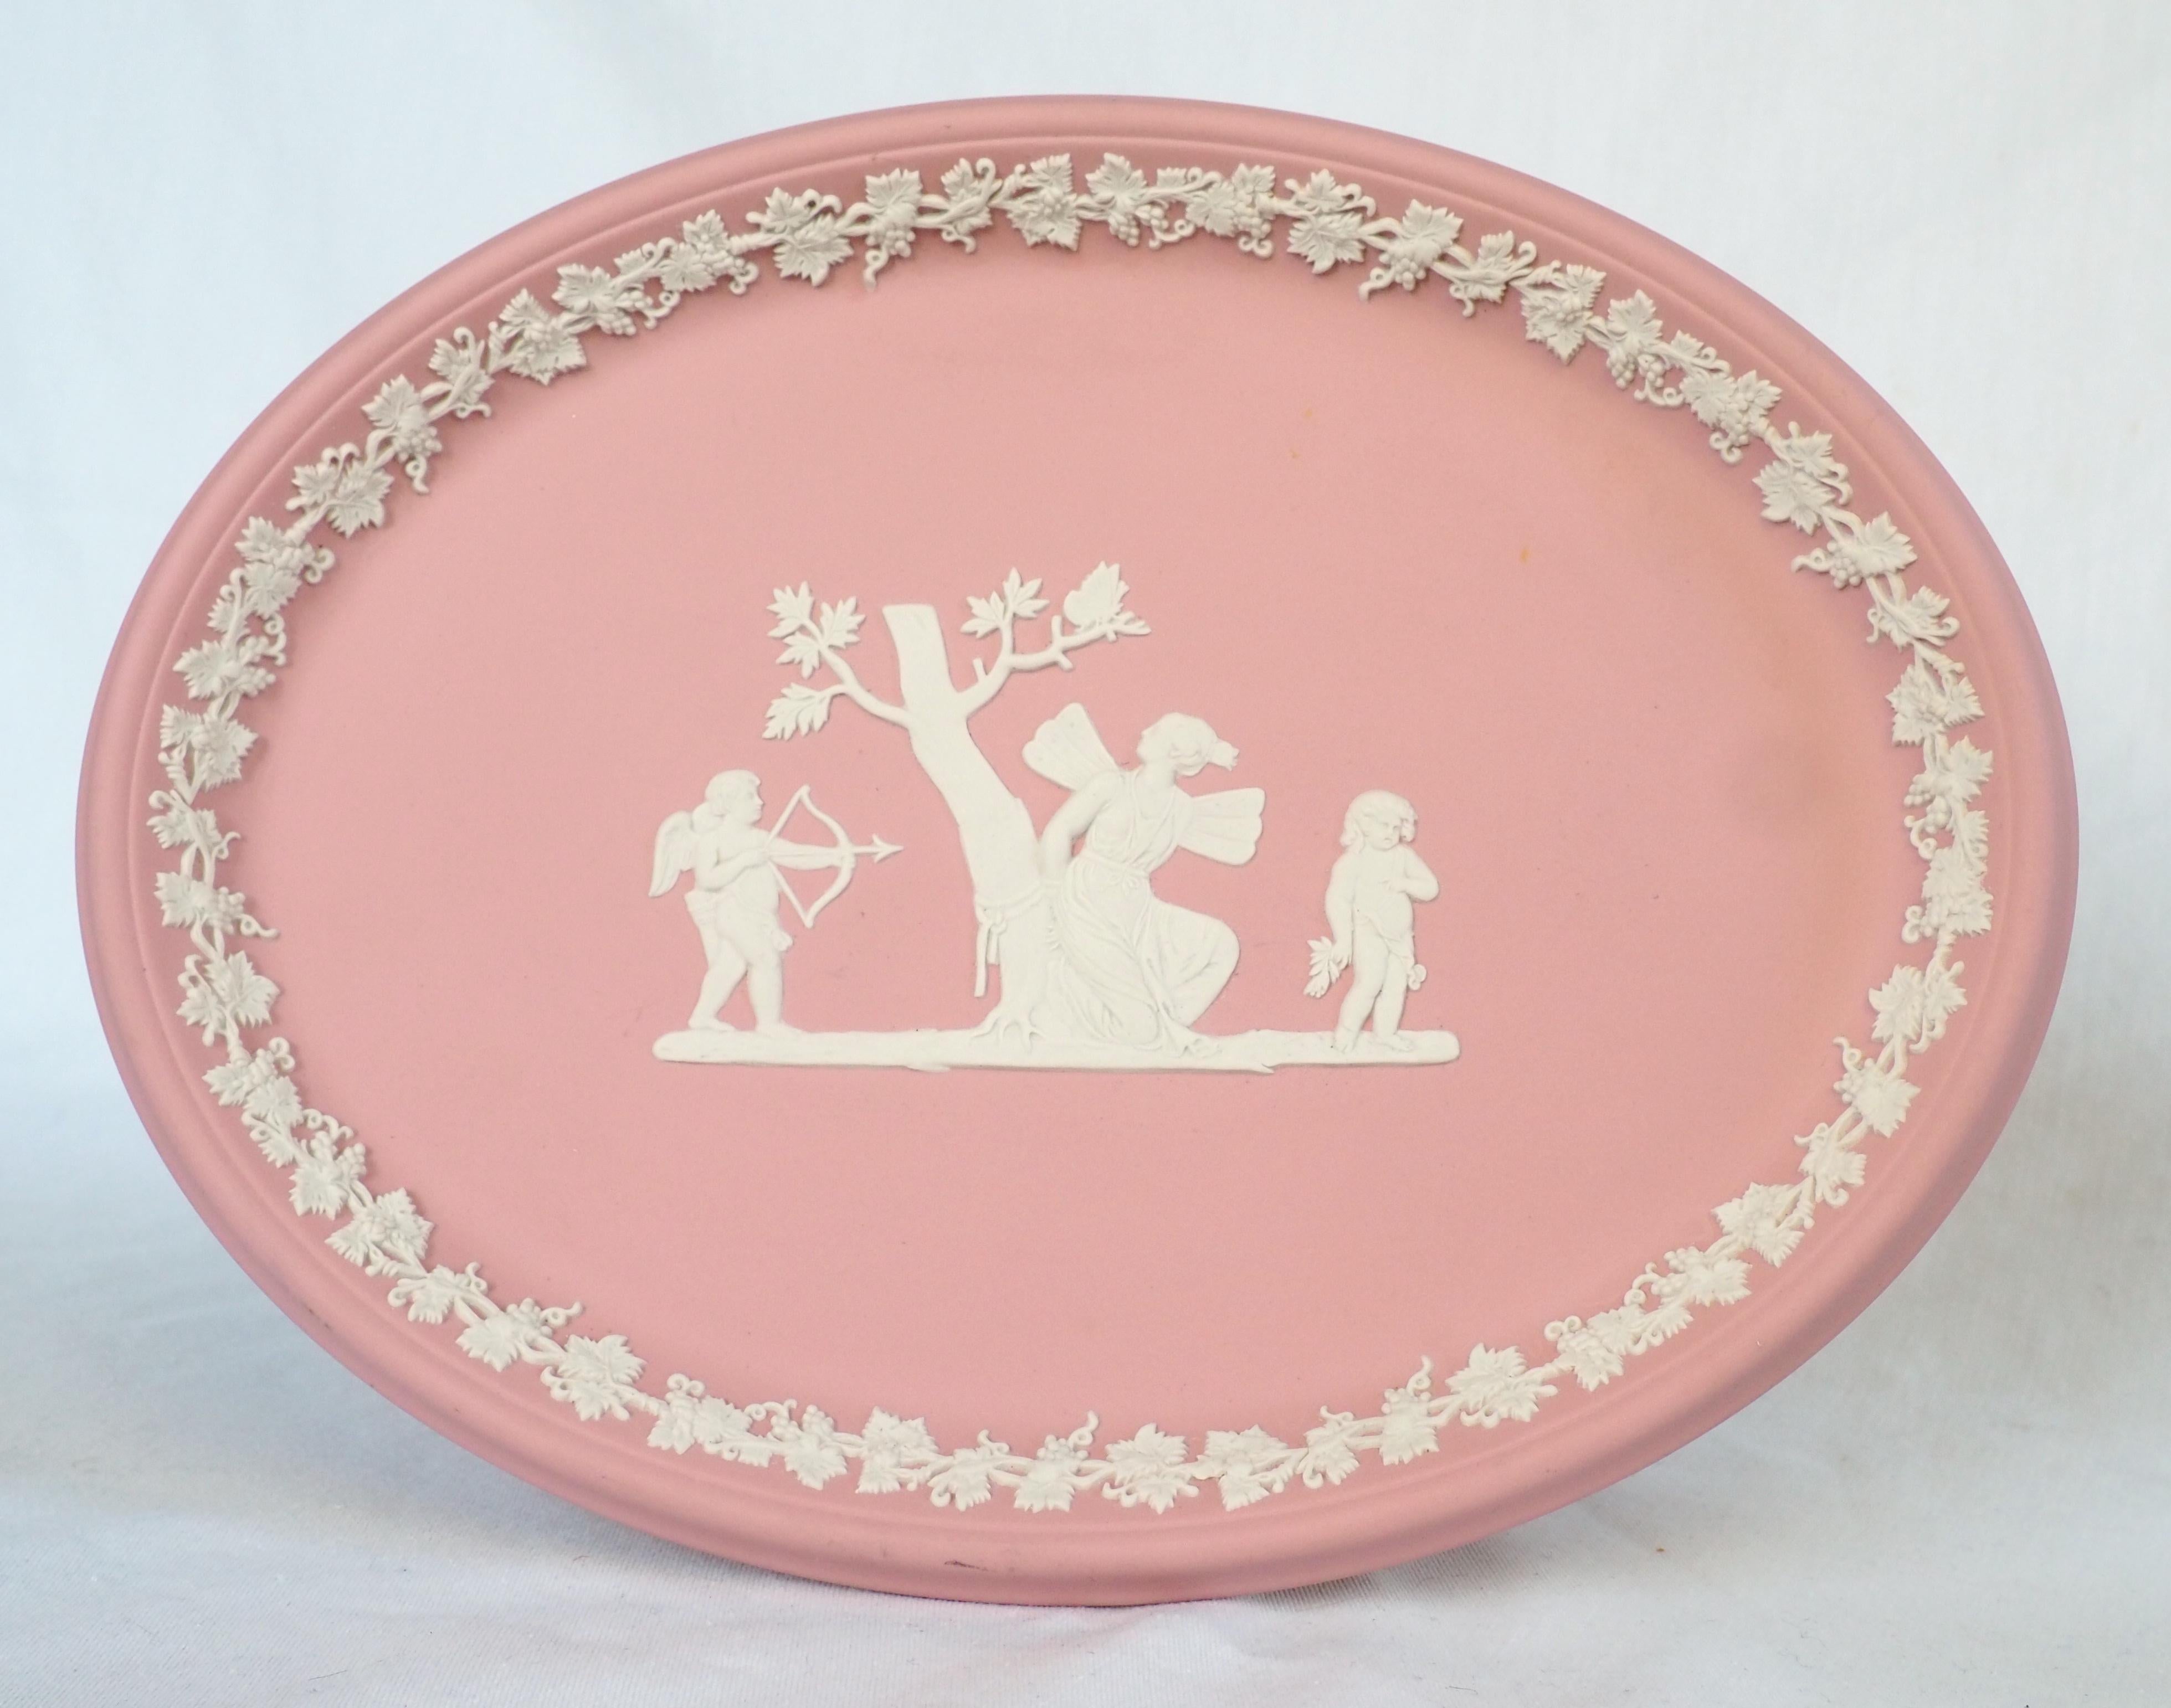 Large Wedgwood jasperware tray, beautiful neoclassical style item decorated with white antique-style scenes picturing Psyche with Cupid around drawing his bow ; rare version on a light pink background.
Second half of 20th century refined and highly